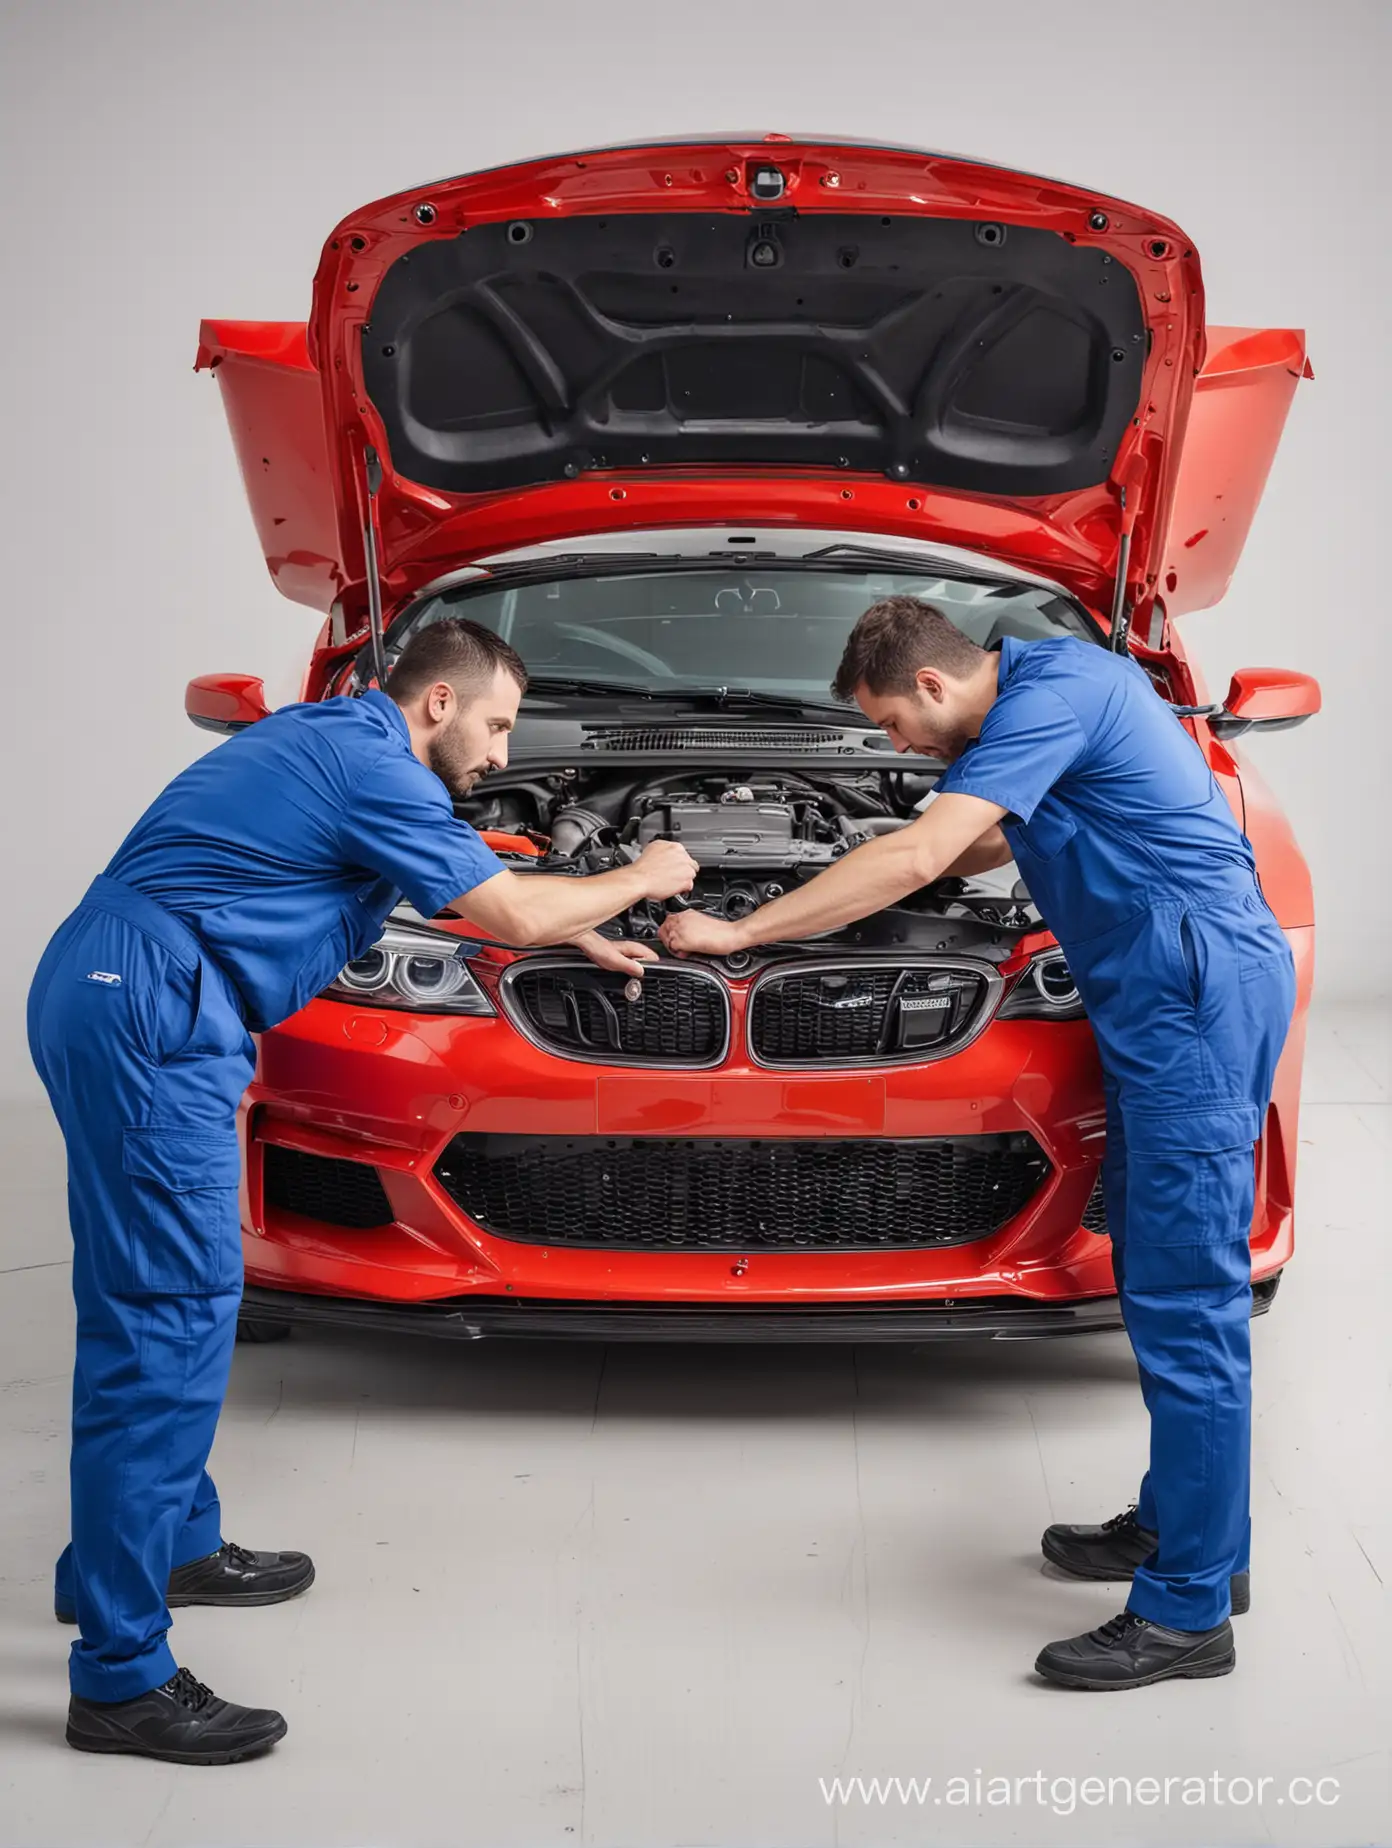 Expert-Mechanic-Repairing-Red-BMW-Car-on-Clean-White-Background